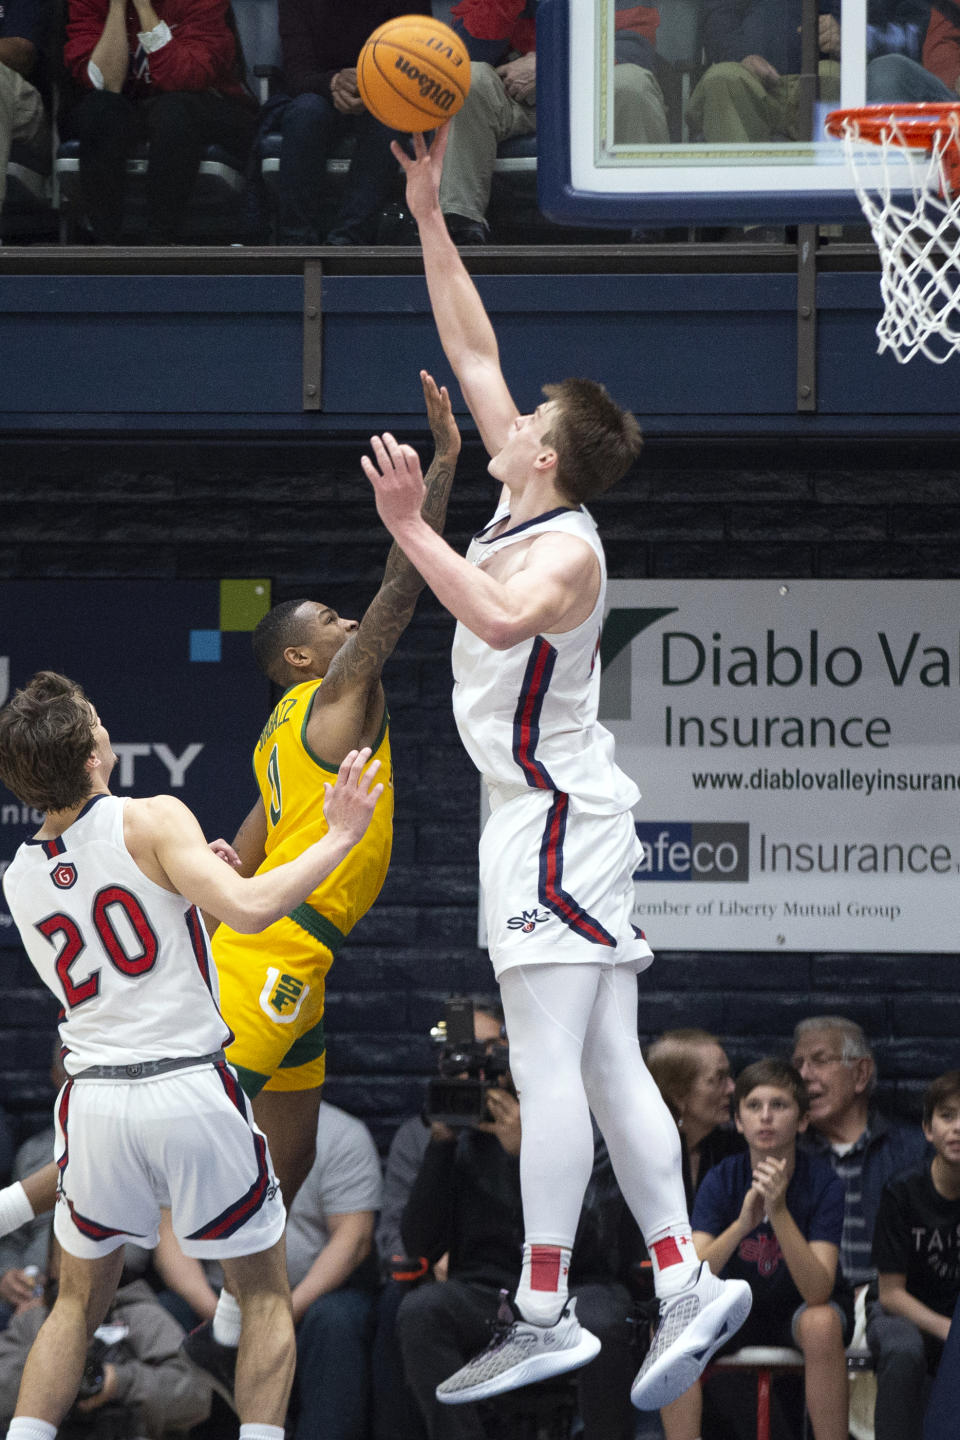 Saint Mary's center Mitchell Saxen (11) blocks a shot by San Francisco guard Khalil Shabazz (0) during the second half of an NCAA college basketball game, Thursday, Feb. 2, 2023, in Moraga, Calif. (AP Photo/D. Ross Cameron)